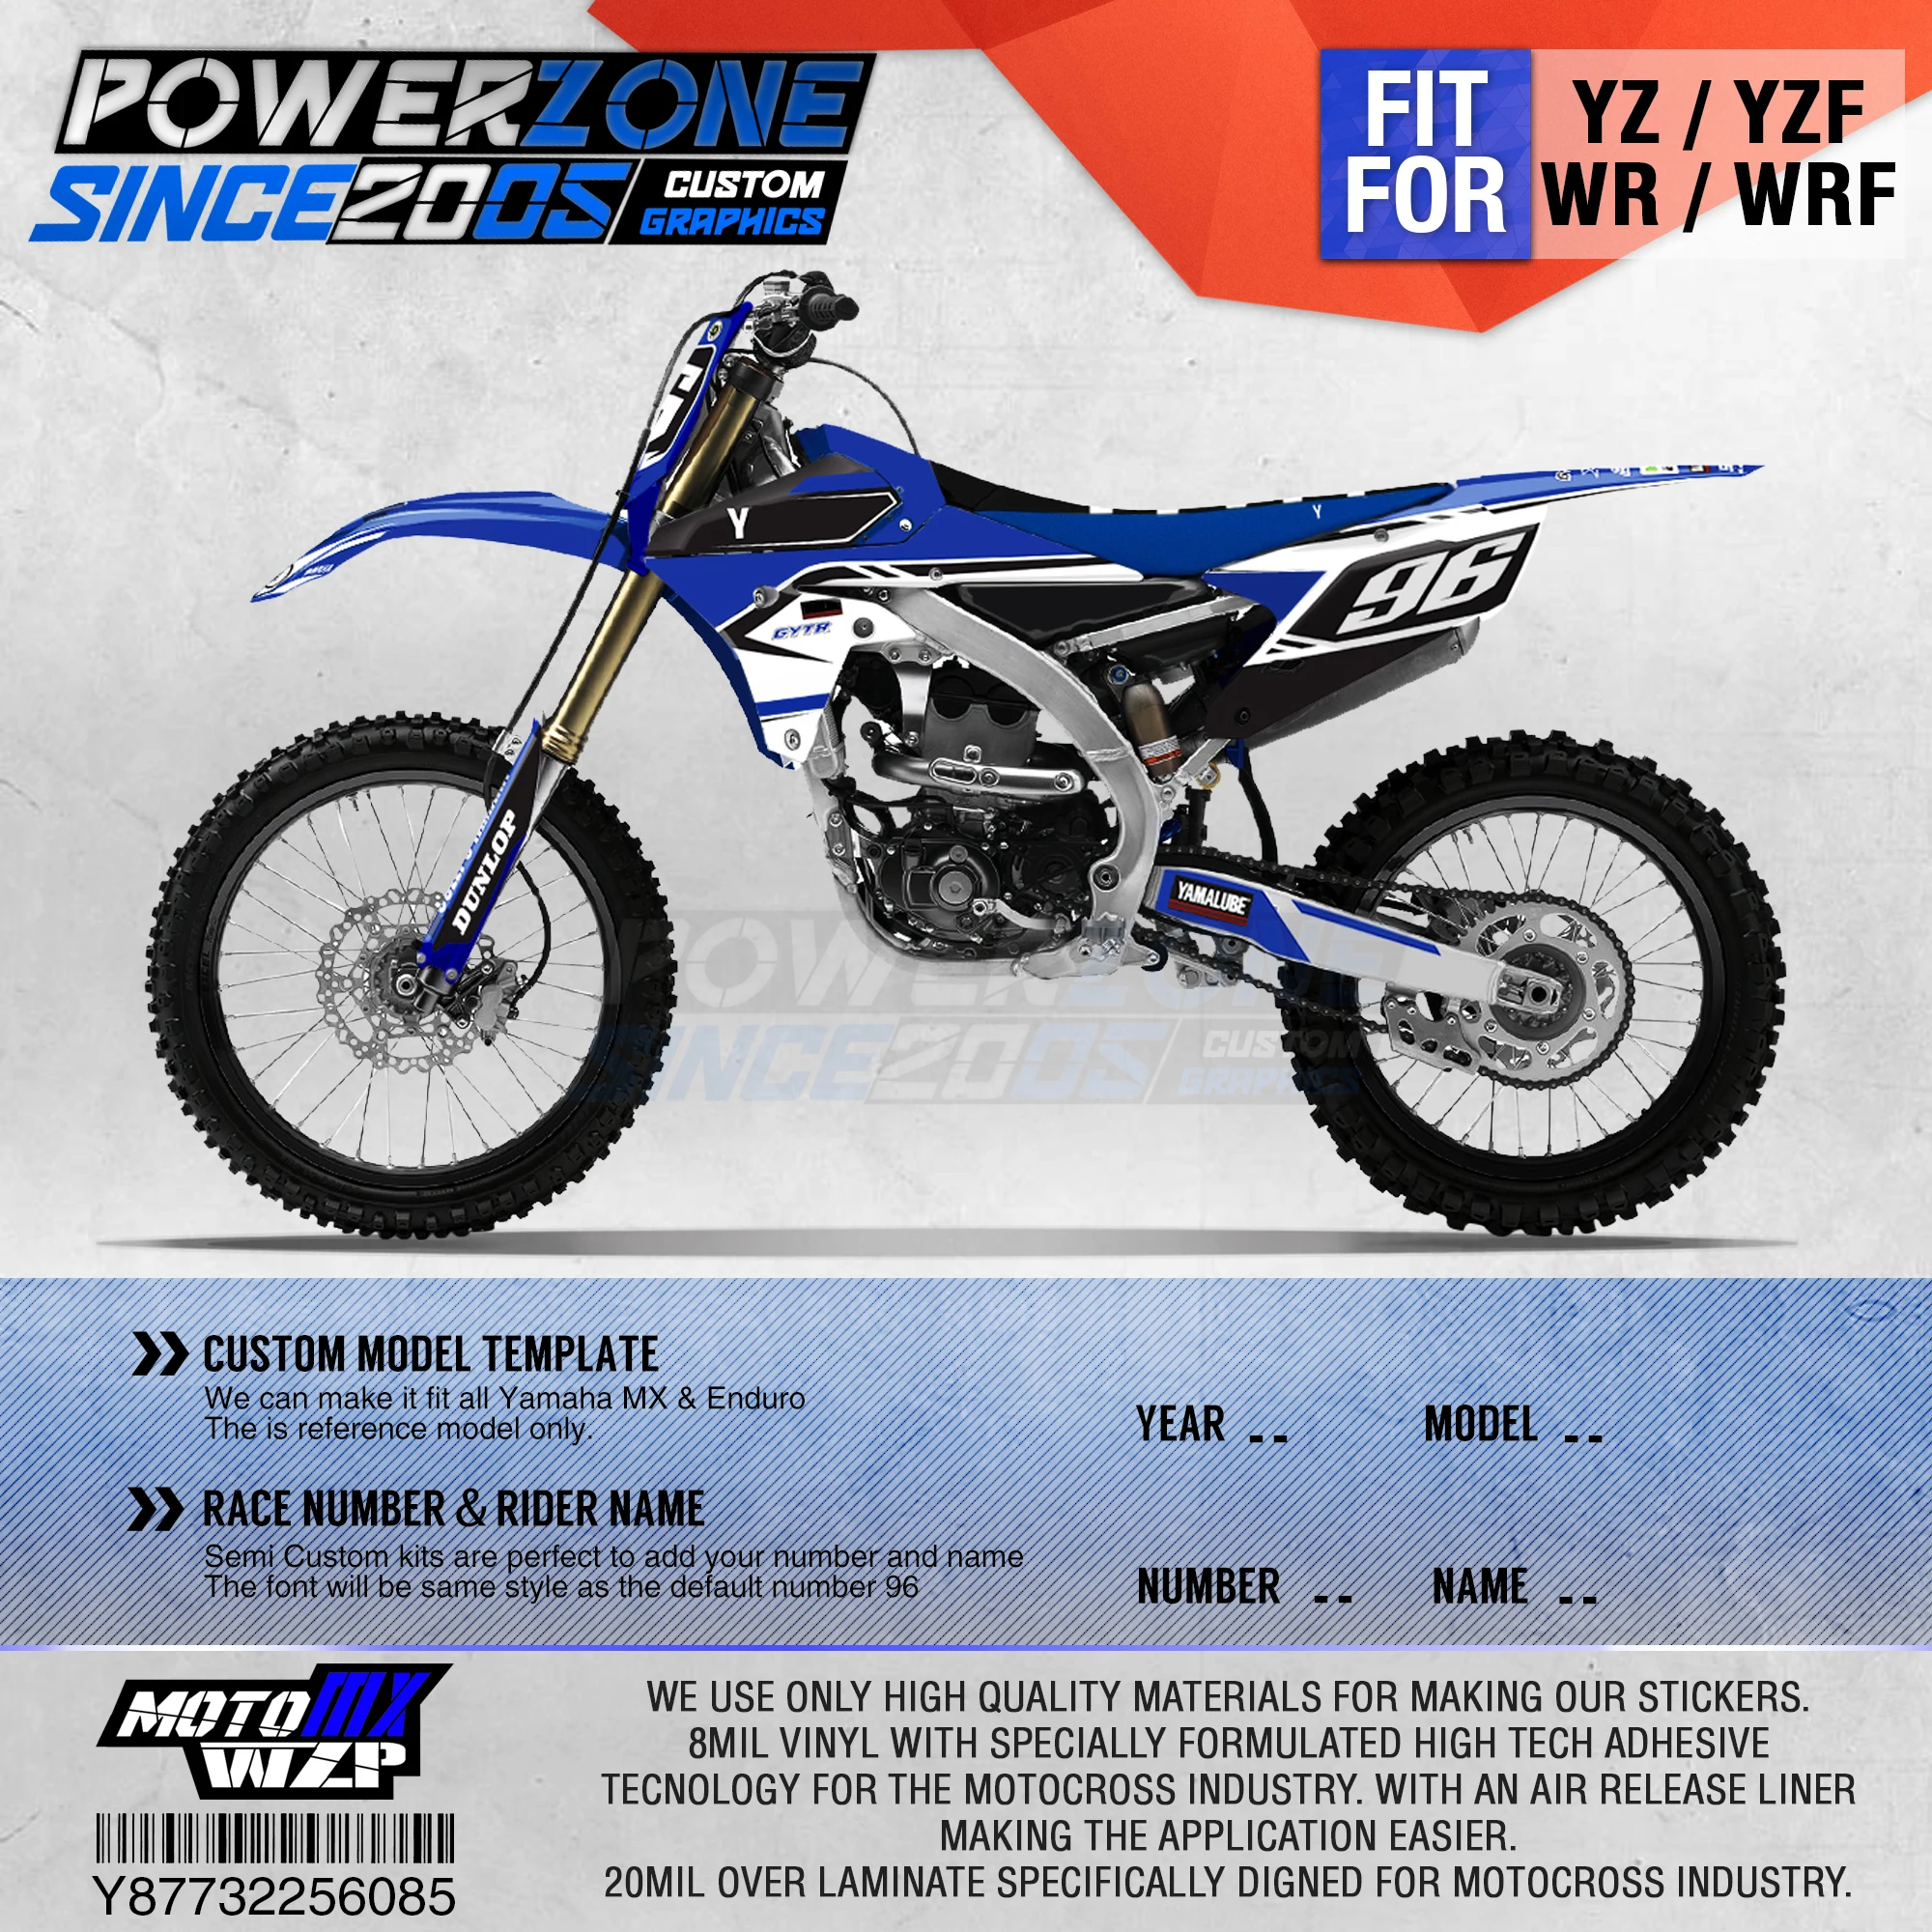 

PowerZone Customized Team Graphics Backgrounds Decals 3M Custom Stickers For YAMAHA YZF250FX 14-18 YFZ 19 YZF450 14-17 18-19 085